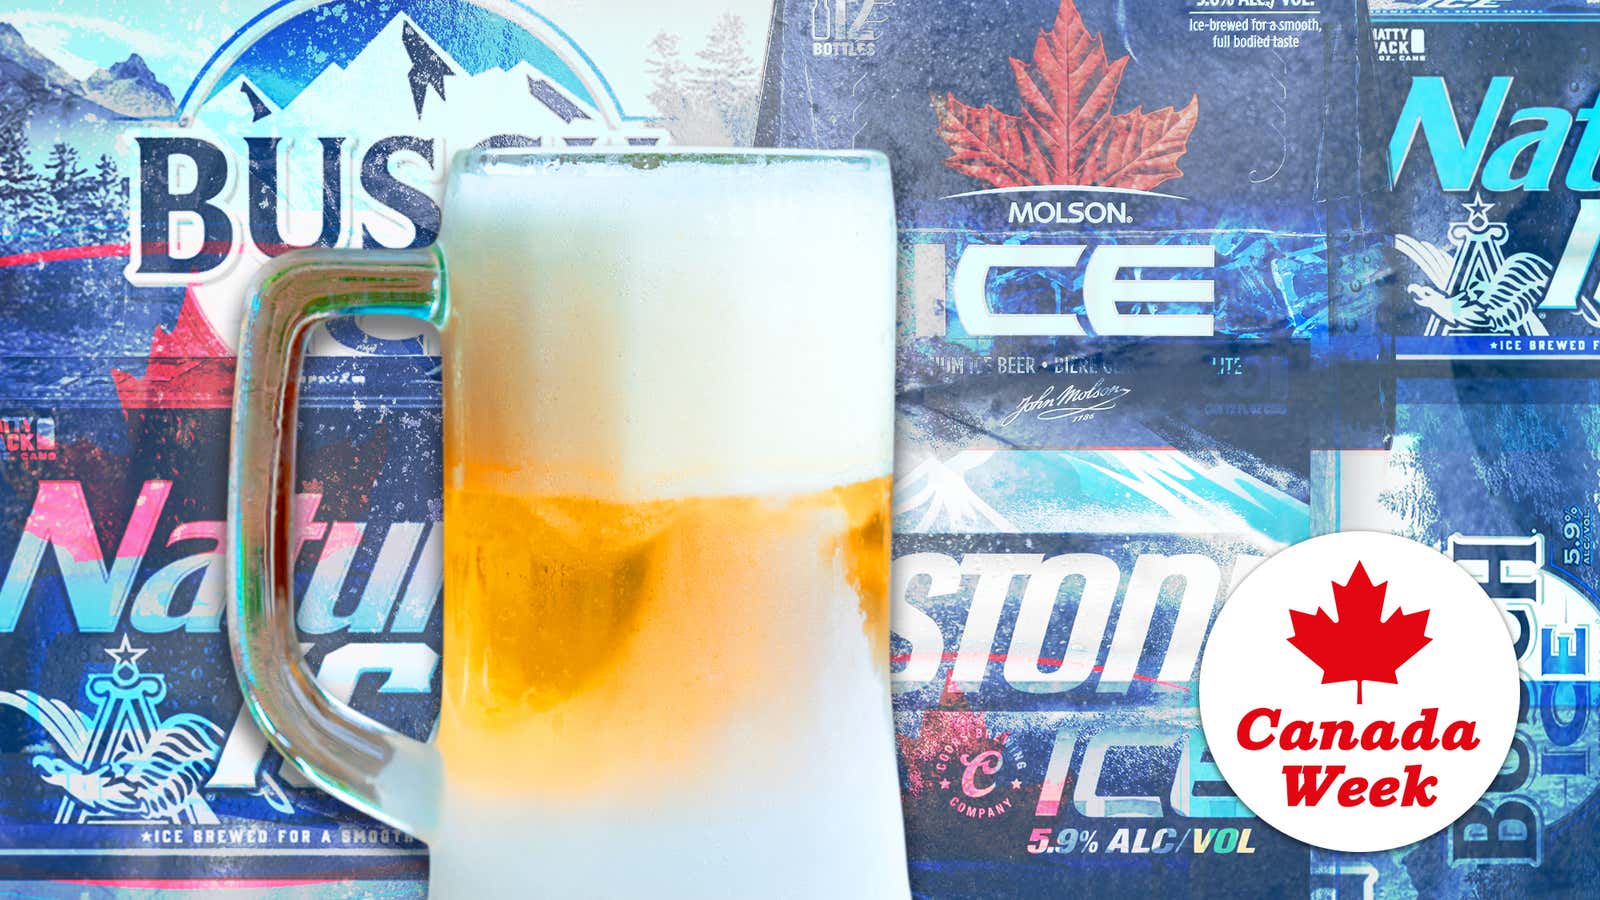 Thanks, Canada, for the ice beers